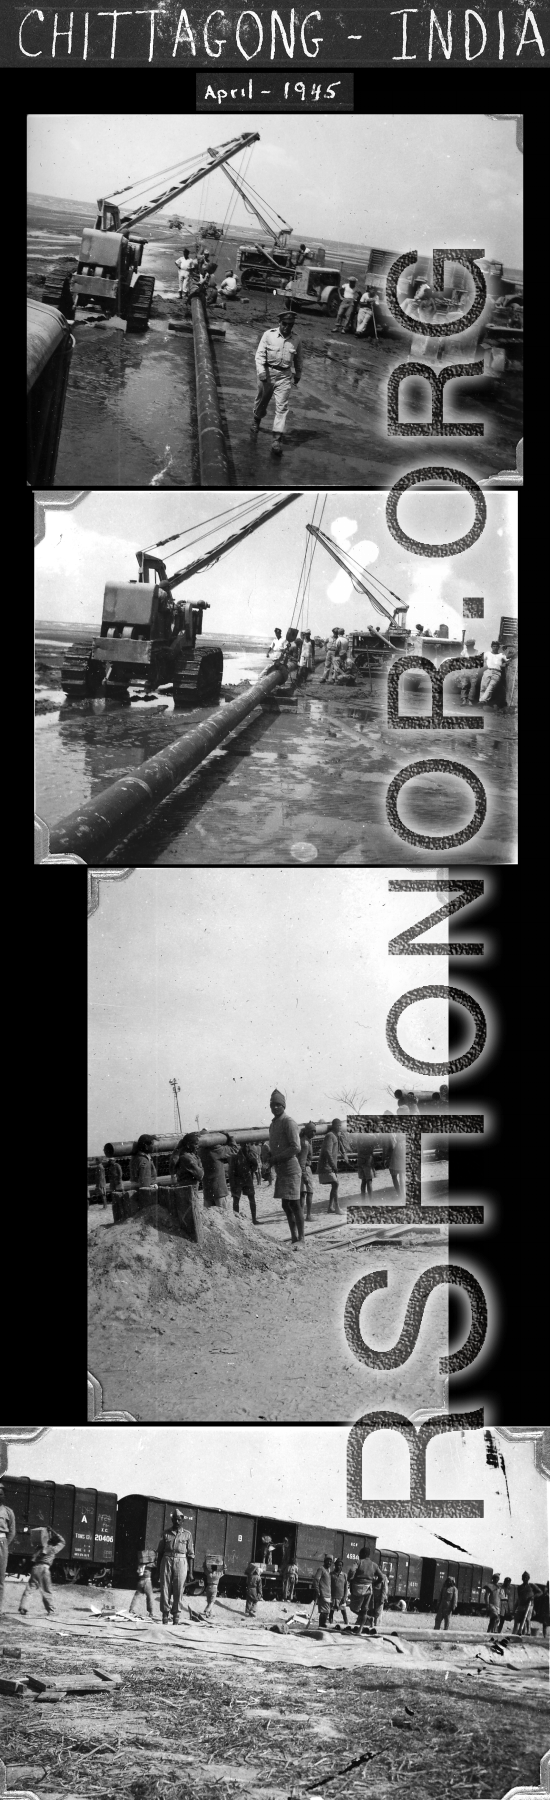 GIs building a petroleum pipeline in Chittagong in April, 1945.